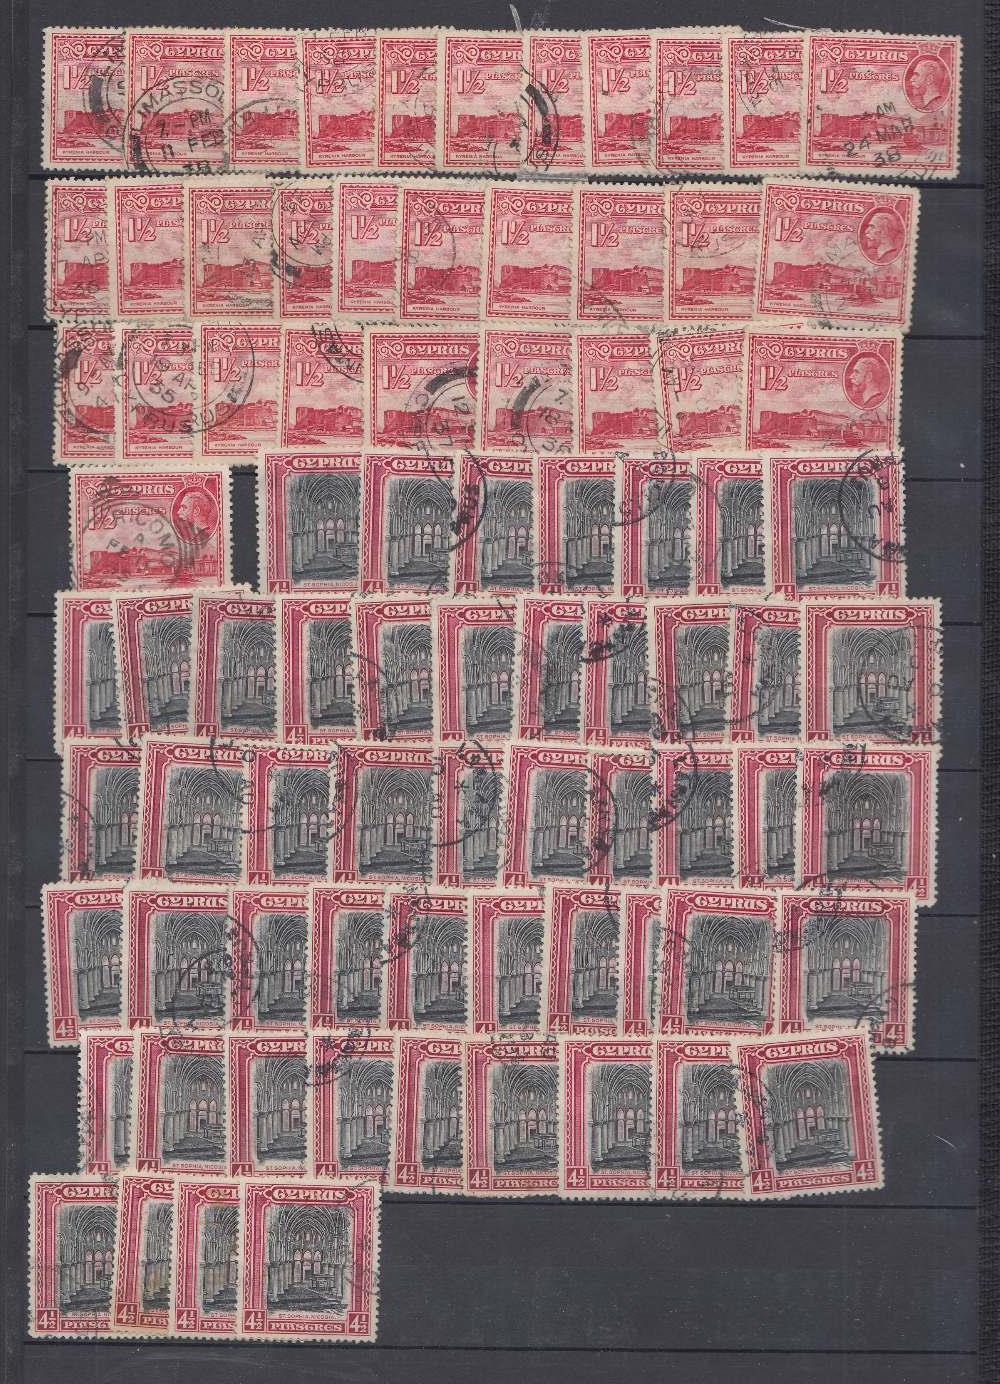 STAMPS CYPRUS - An ex-dealers mint and used duplicated stock housed in two stock books with QV to - Image 2 of 3